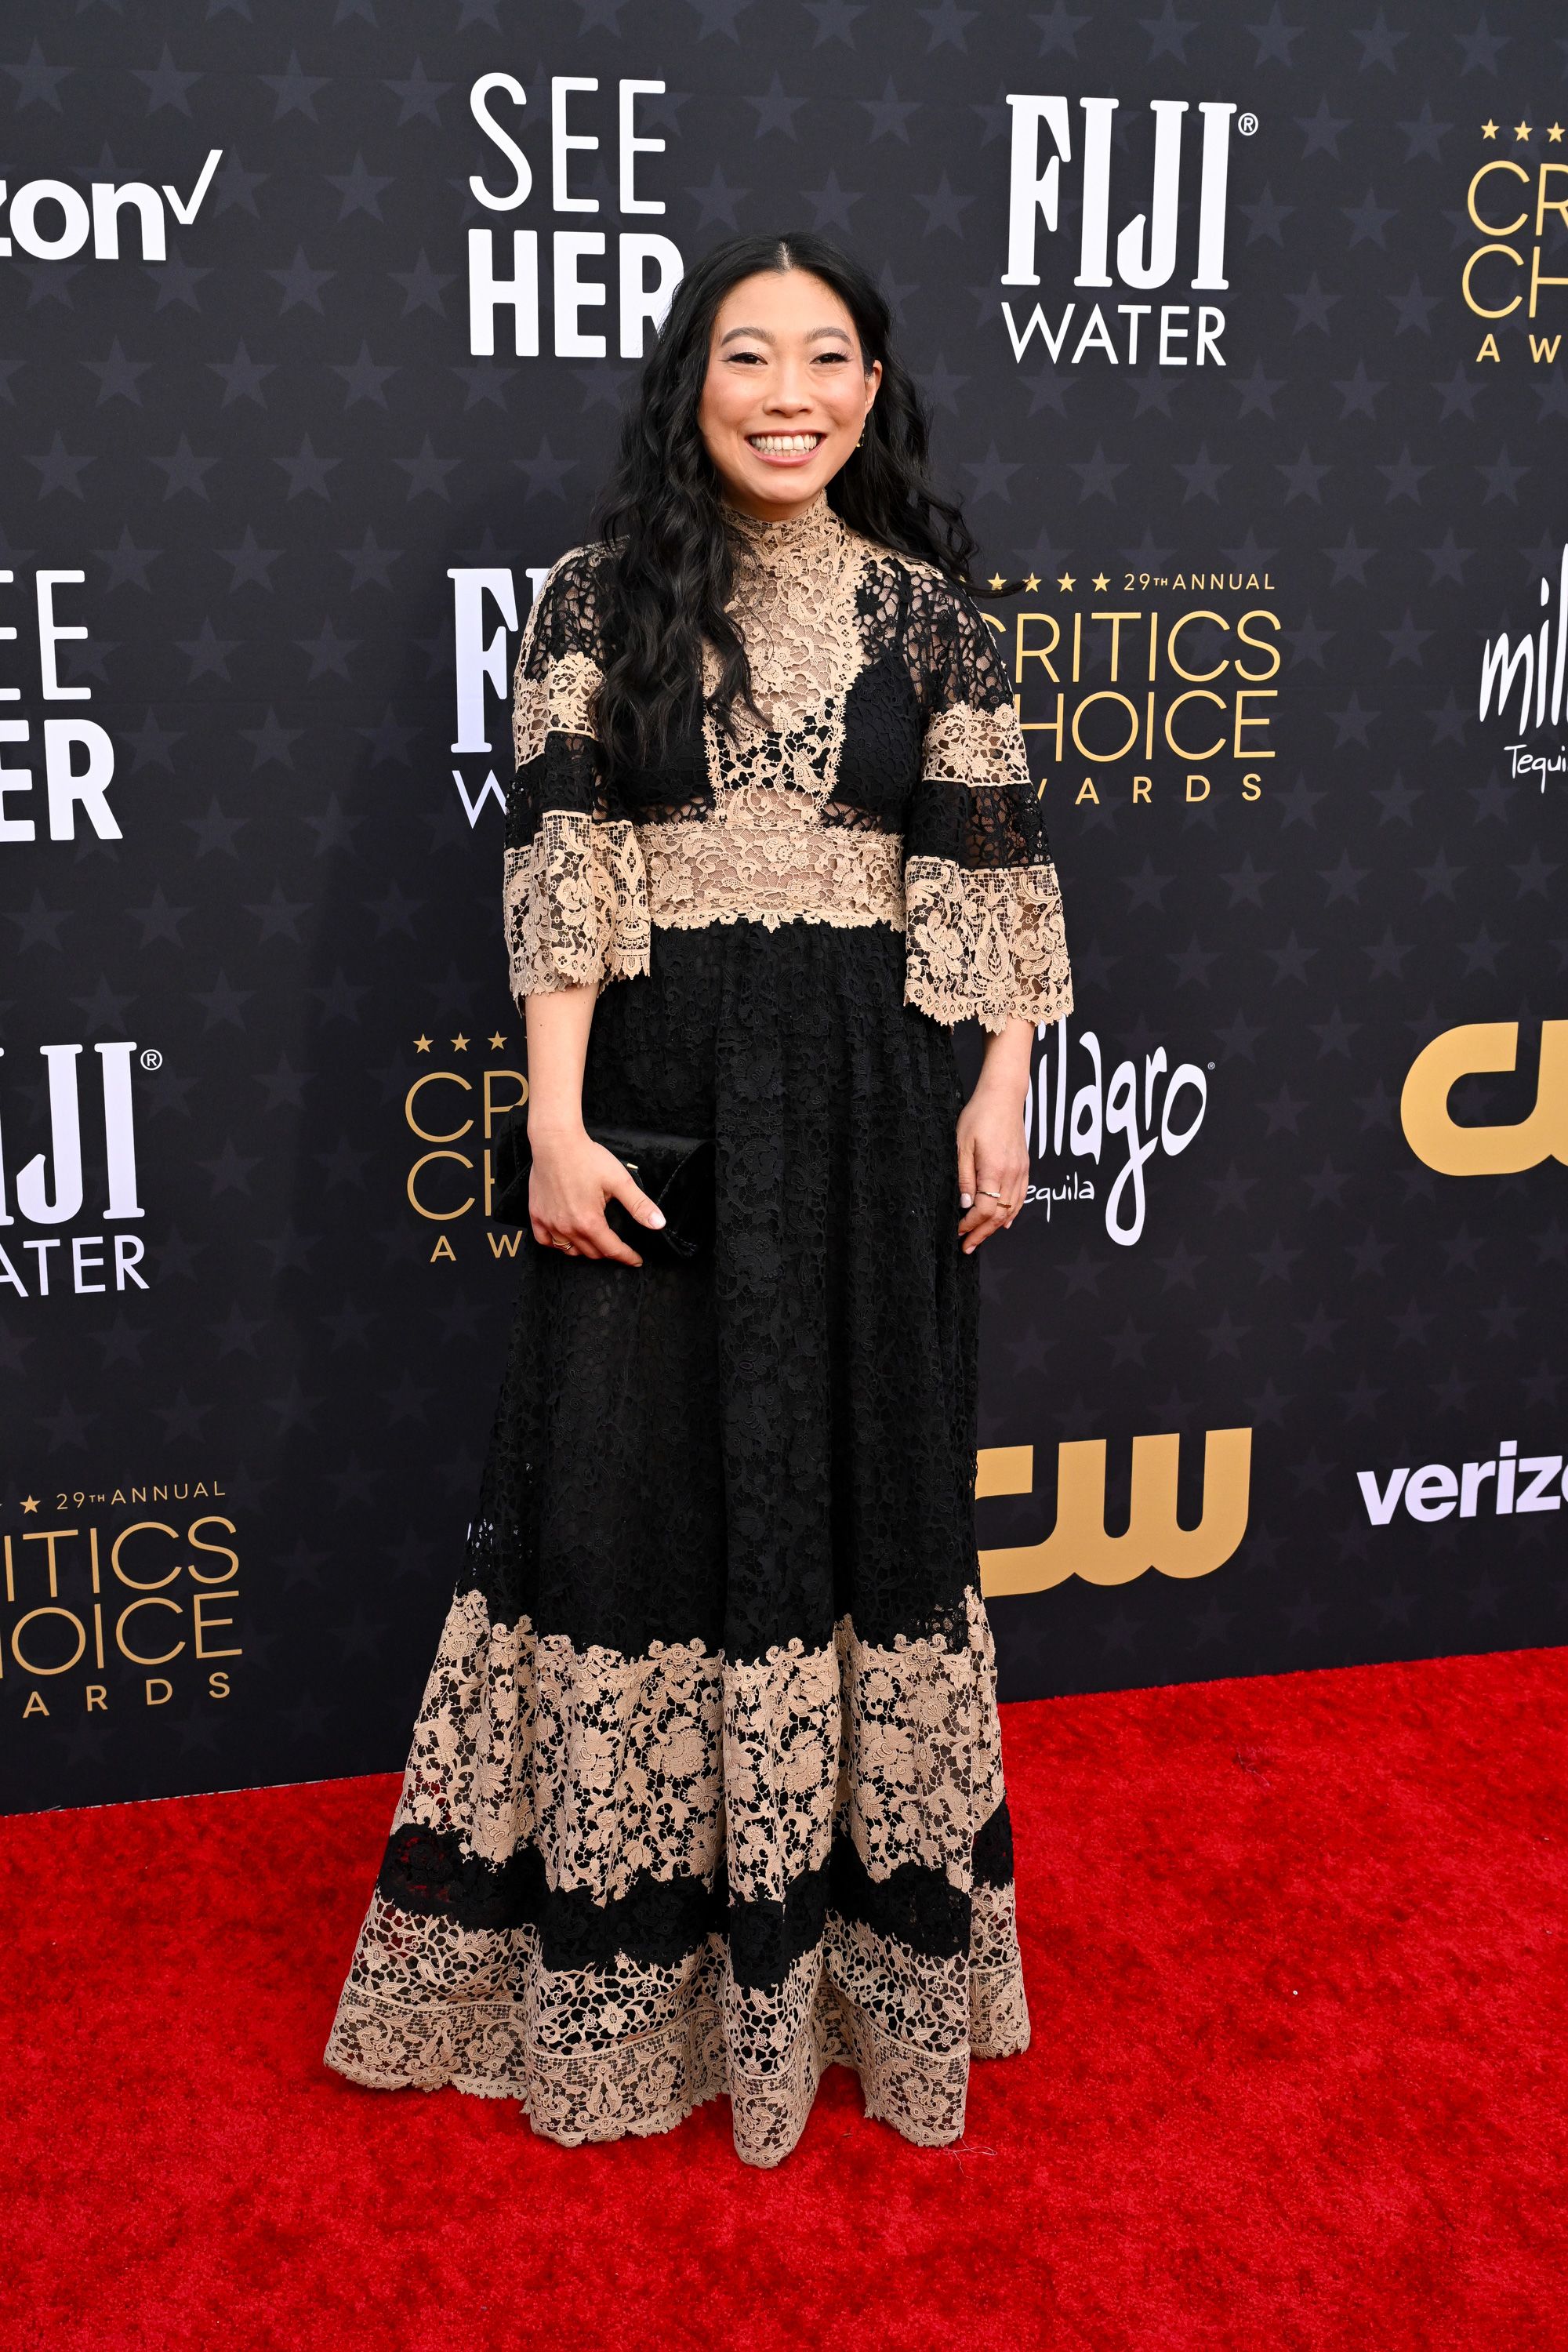 Rapper and actress Awkwafina looked elegant in a two-tone lace Dior Haute Couture dress.